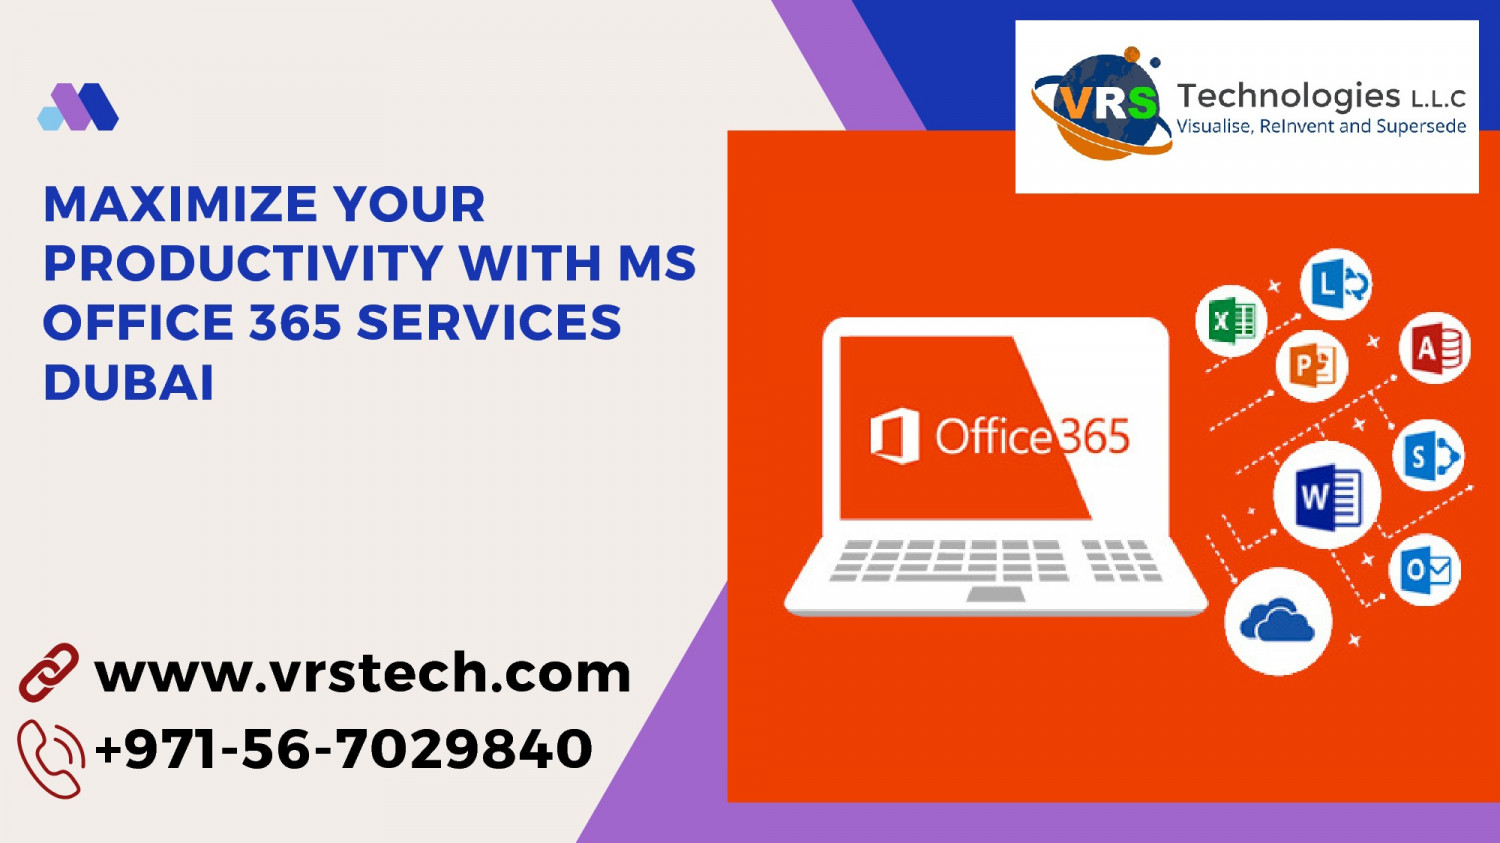 Maximize your Productive with MS Office 365 Services in Dubai Infographic